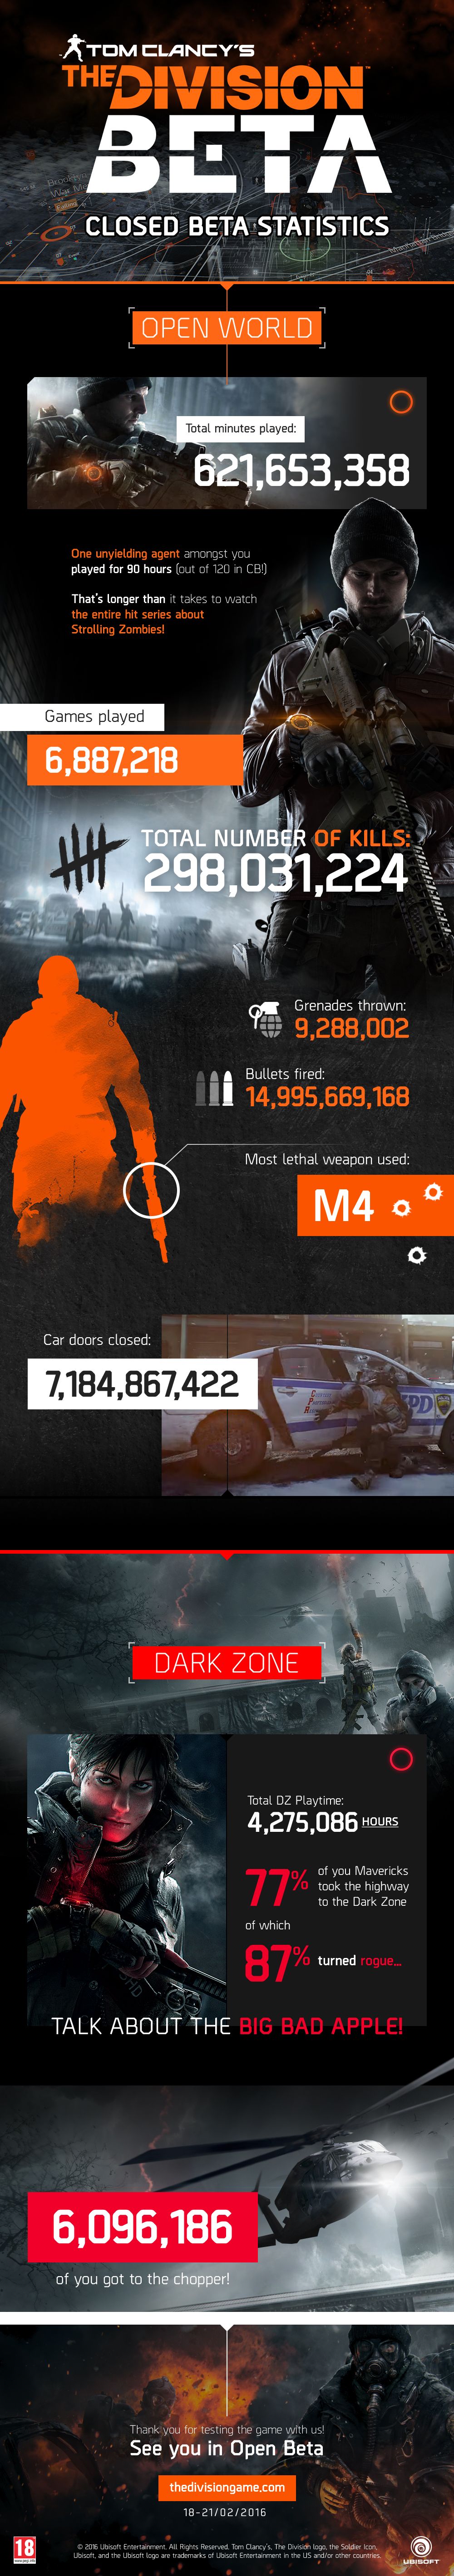 the_division_closed_beta_infographic